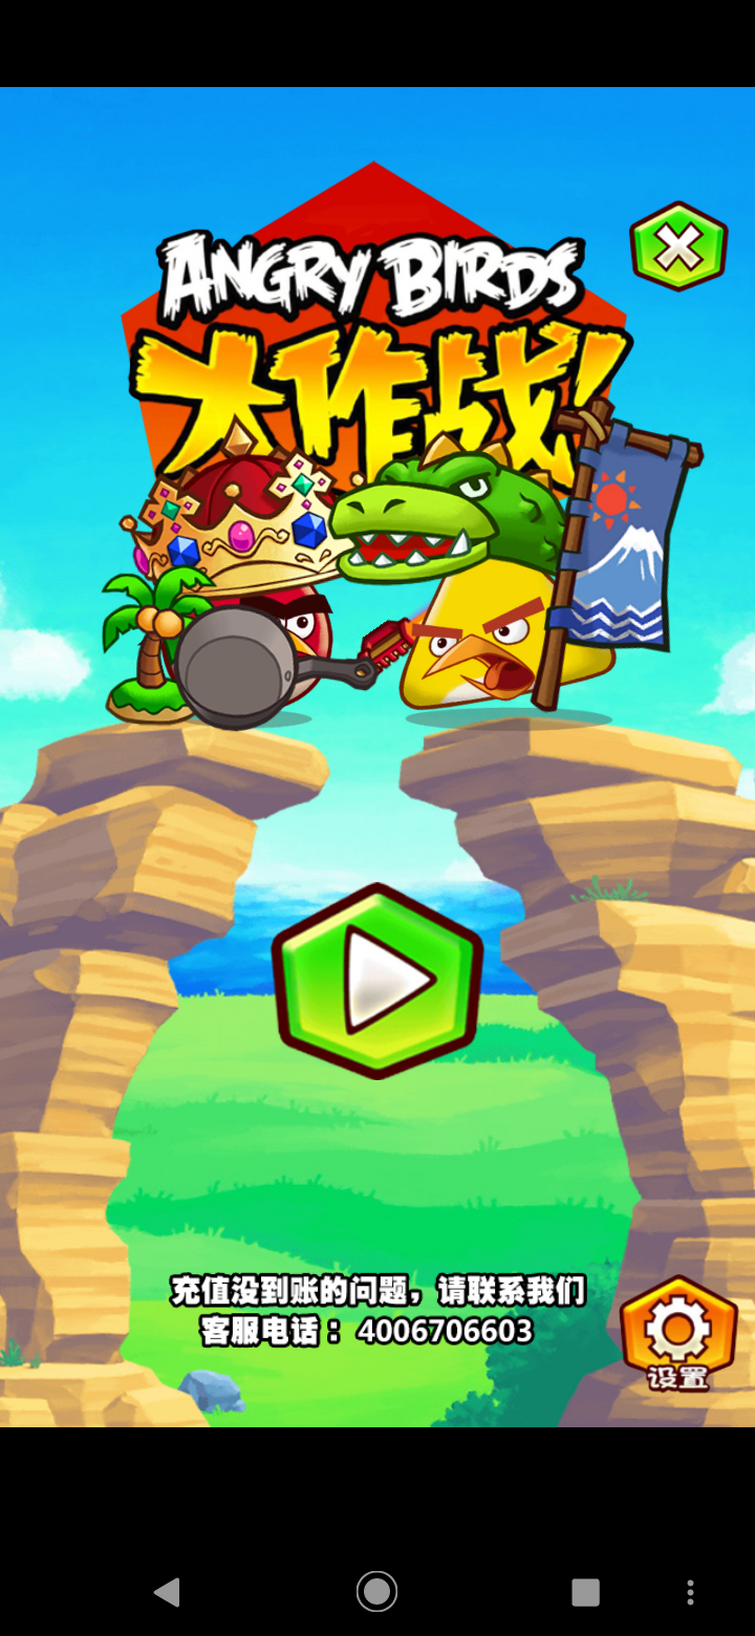 Angry Birds Fight You Can Still Play It Works If You Are Not Connected To The Internet Link Fandom